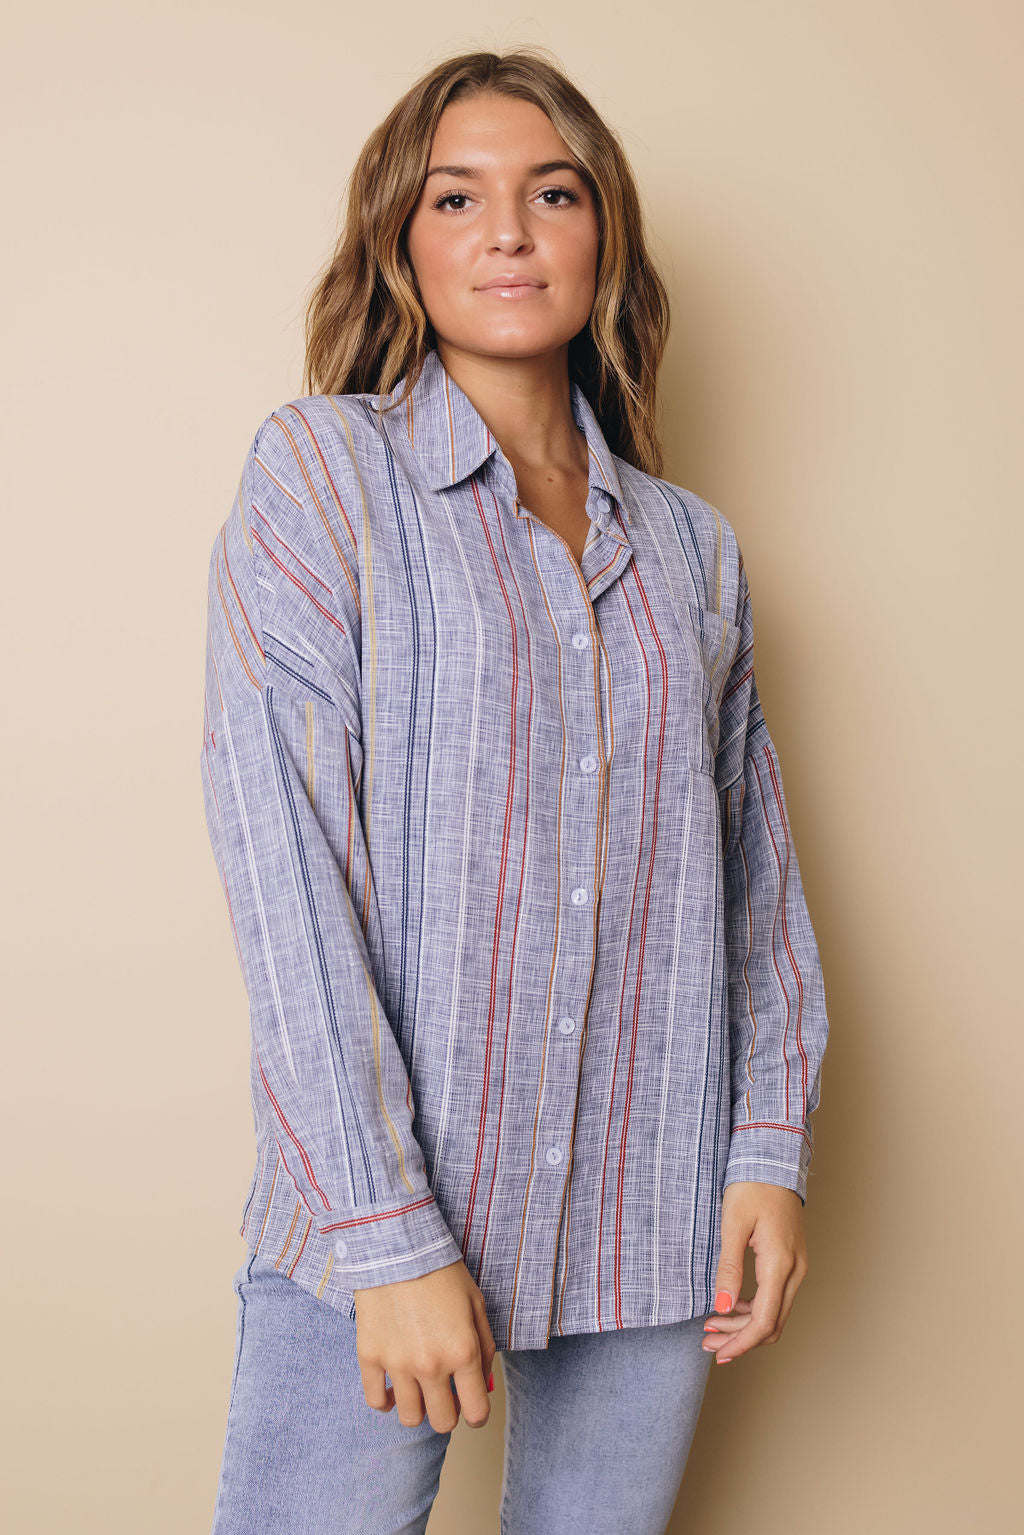 Stripe Button Down Shirt Stay Warm In Style